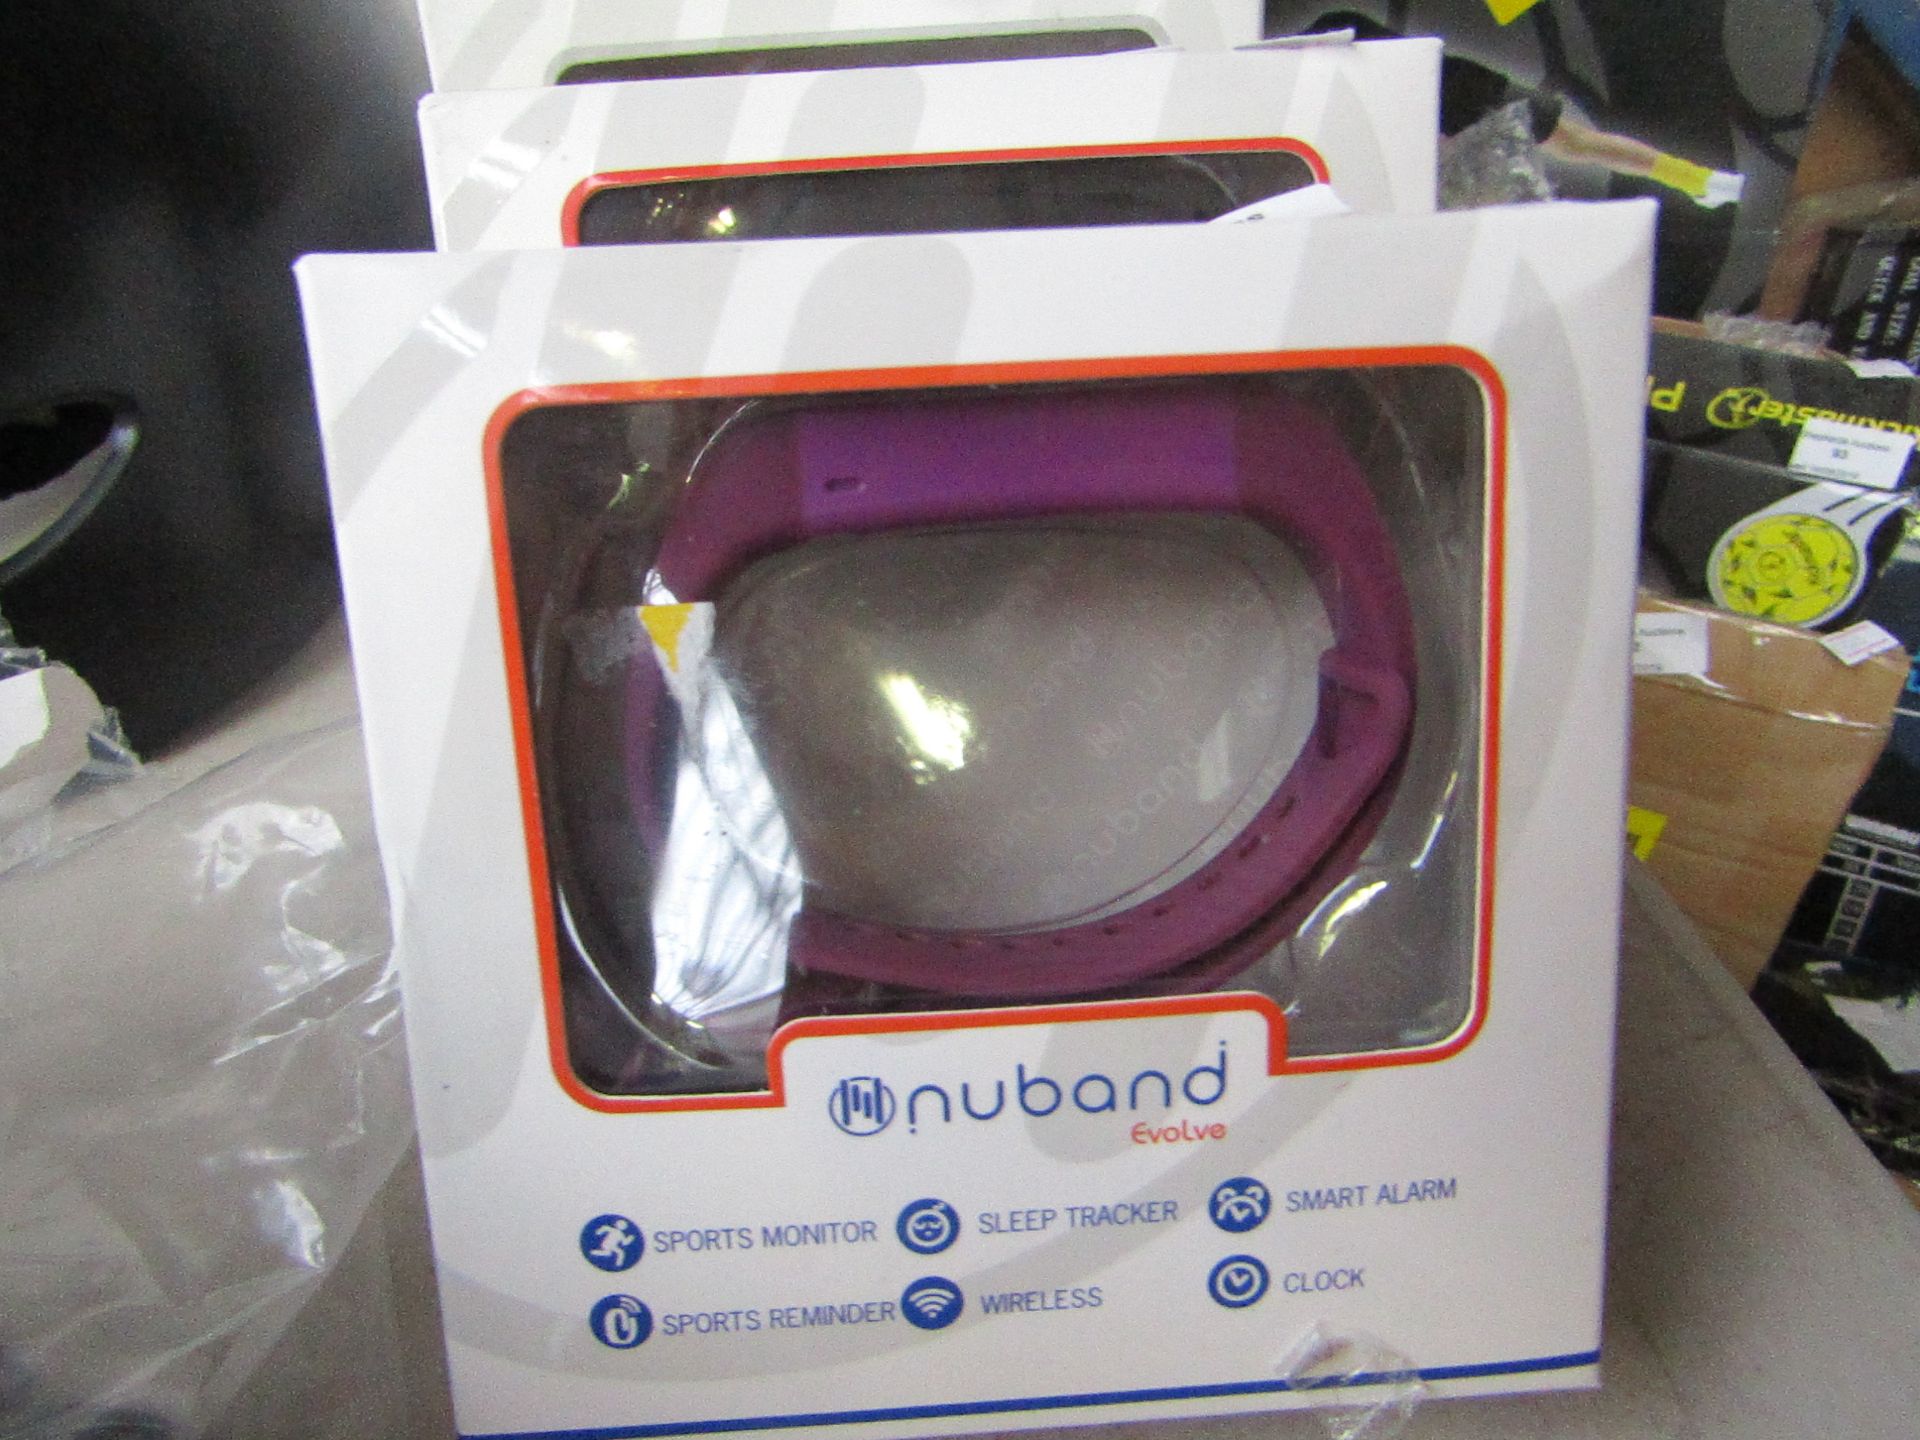 Nuband Evolve sports fitness tracker, untested and boxed.